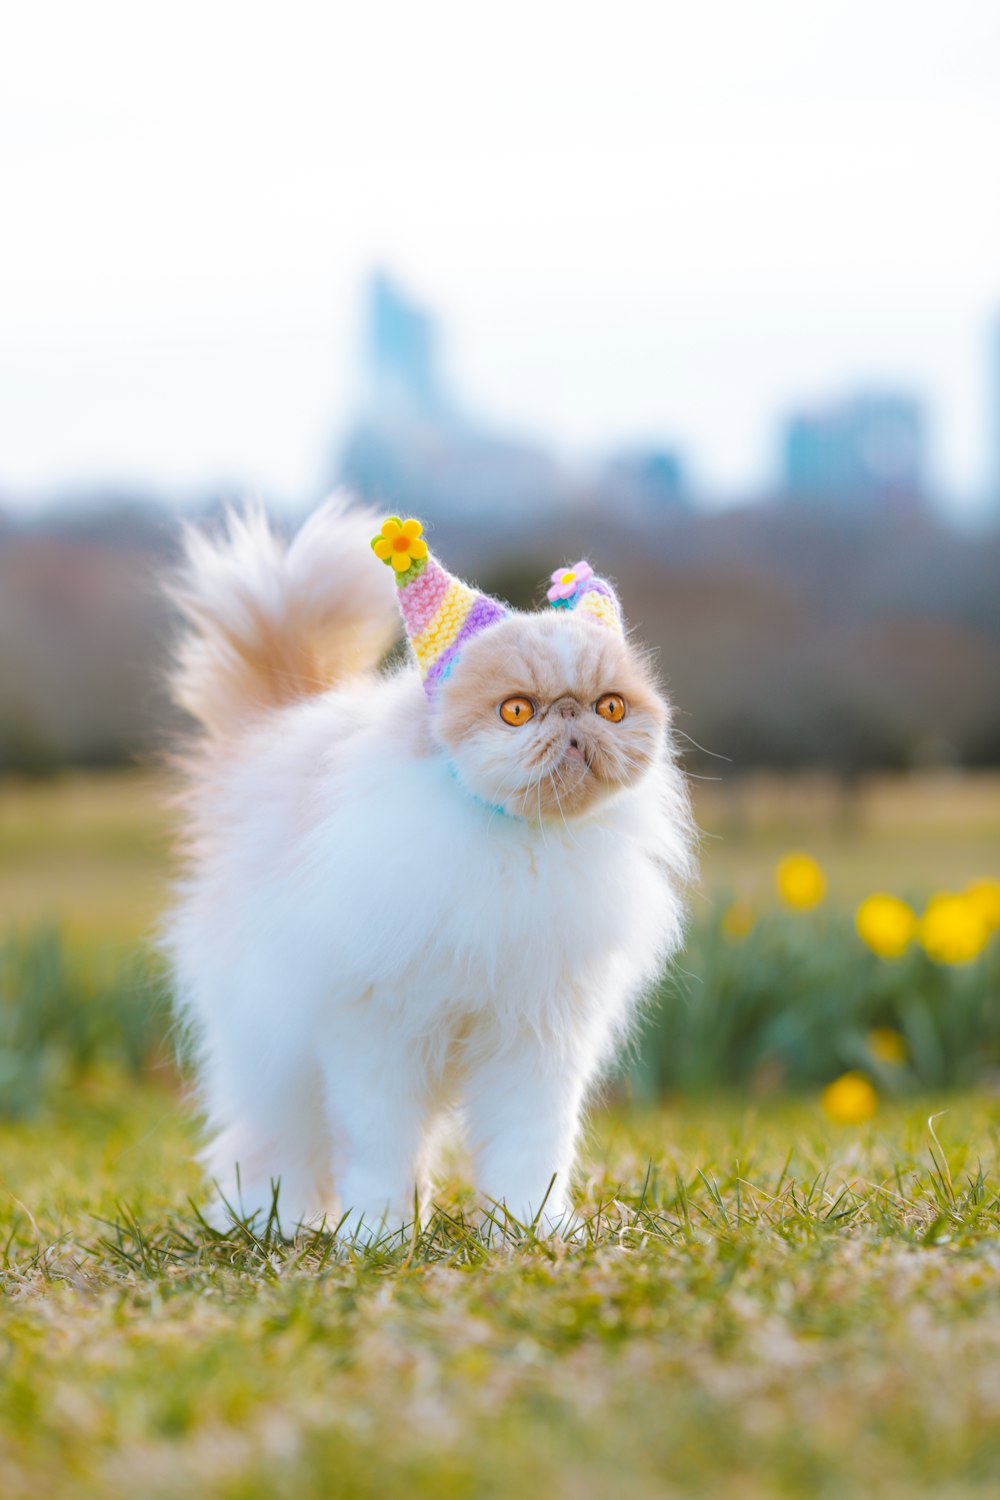 a cat with a party hat on walking in the grass